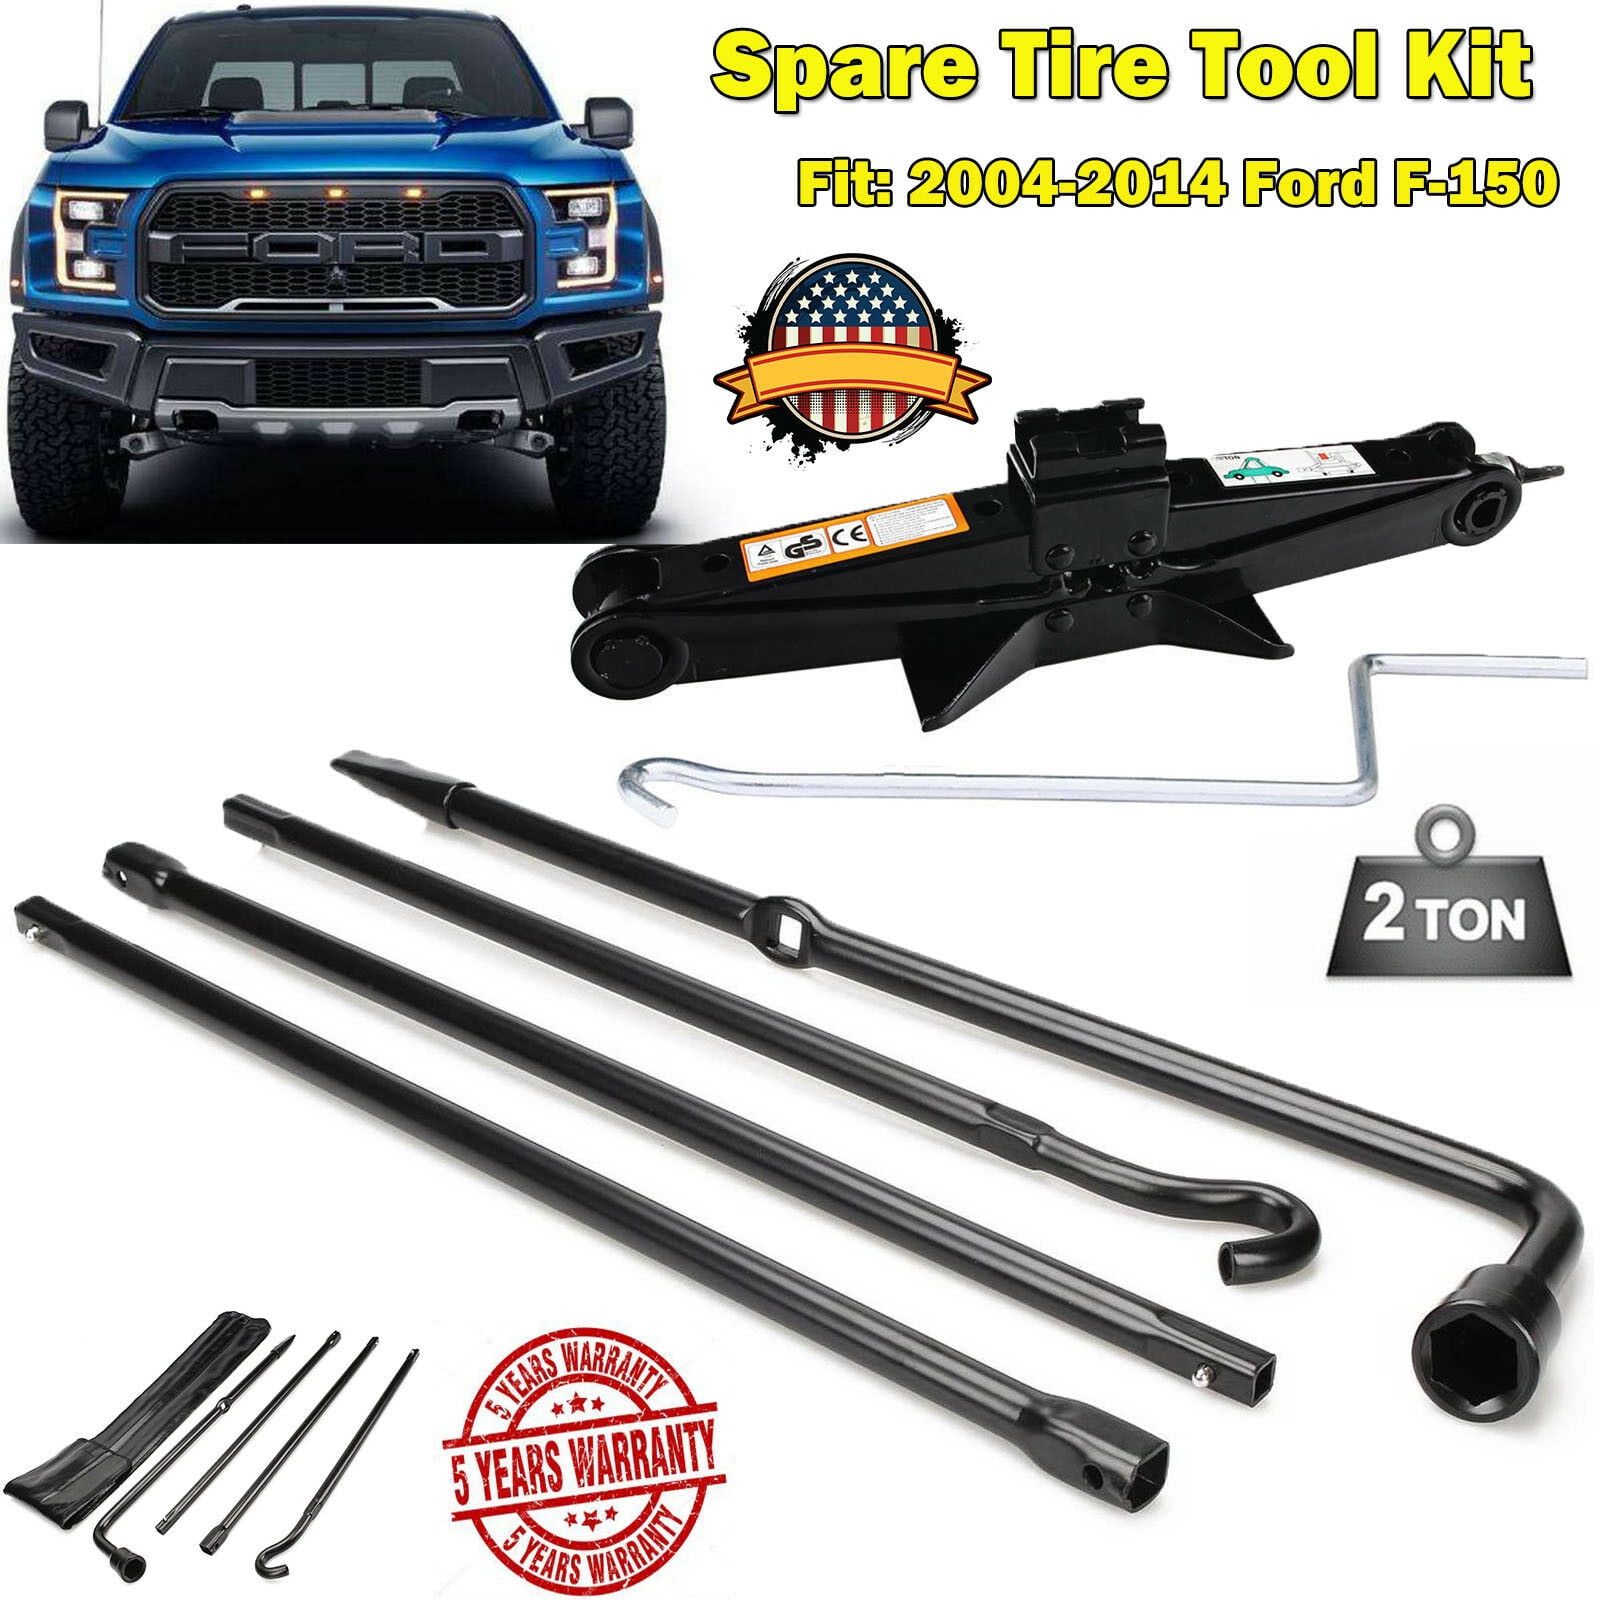 L Shape Spare Tire Wheel Lug Wrench+2T Lift Jack for For 2004-2014 Ford F-150 